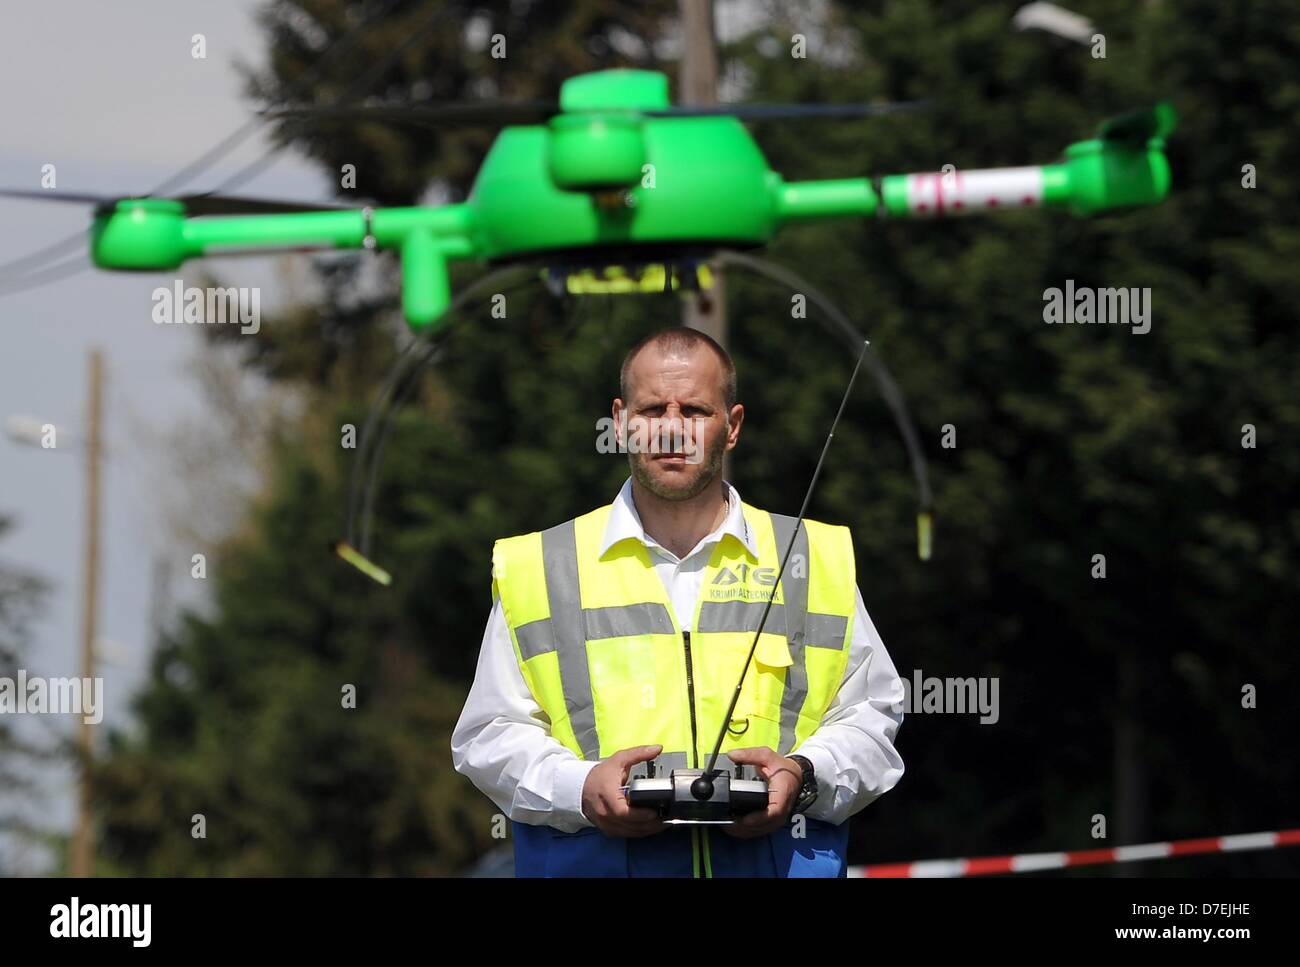 Drone pilot controls the flight of his drone in Berlin, Germany, 06 May 2013. The remote controlled helicopter is supposed to apply artificial DNA to cables of telecommunications company Telekom in order to prevent thefts of copper. Photo: BRITTA PEDERSEN Stock Photo